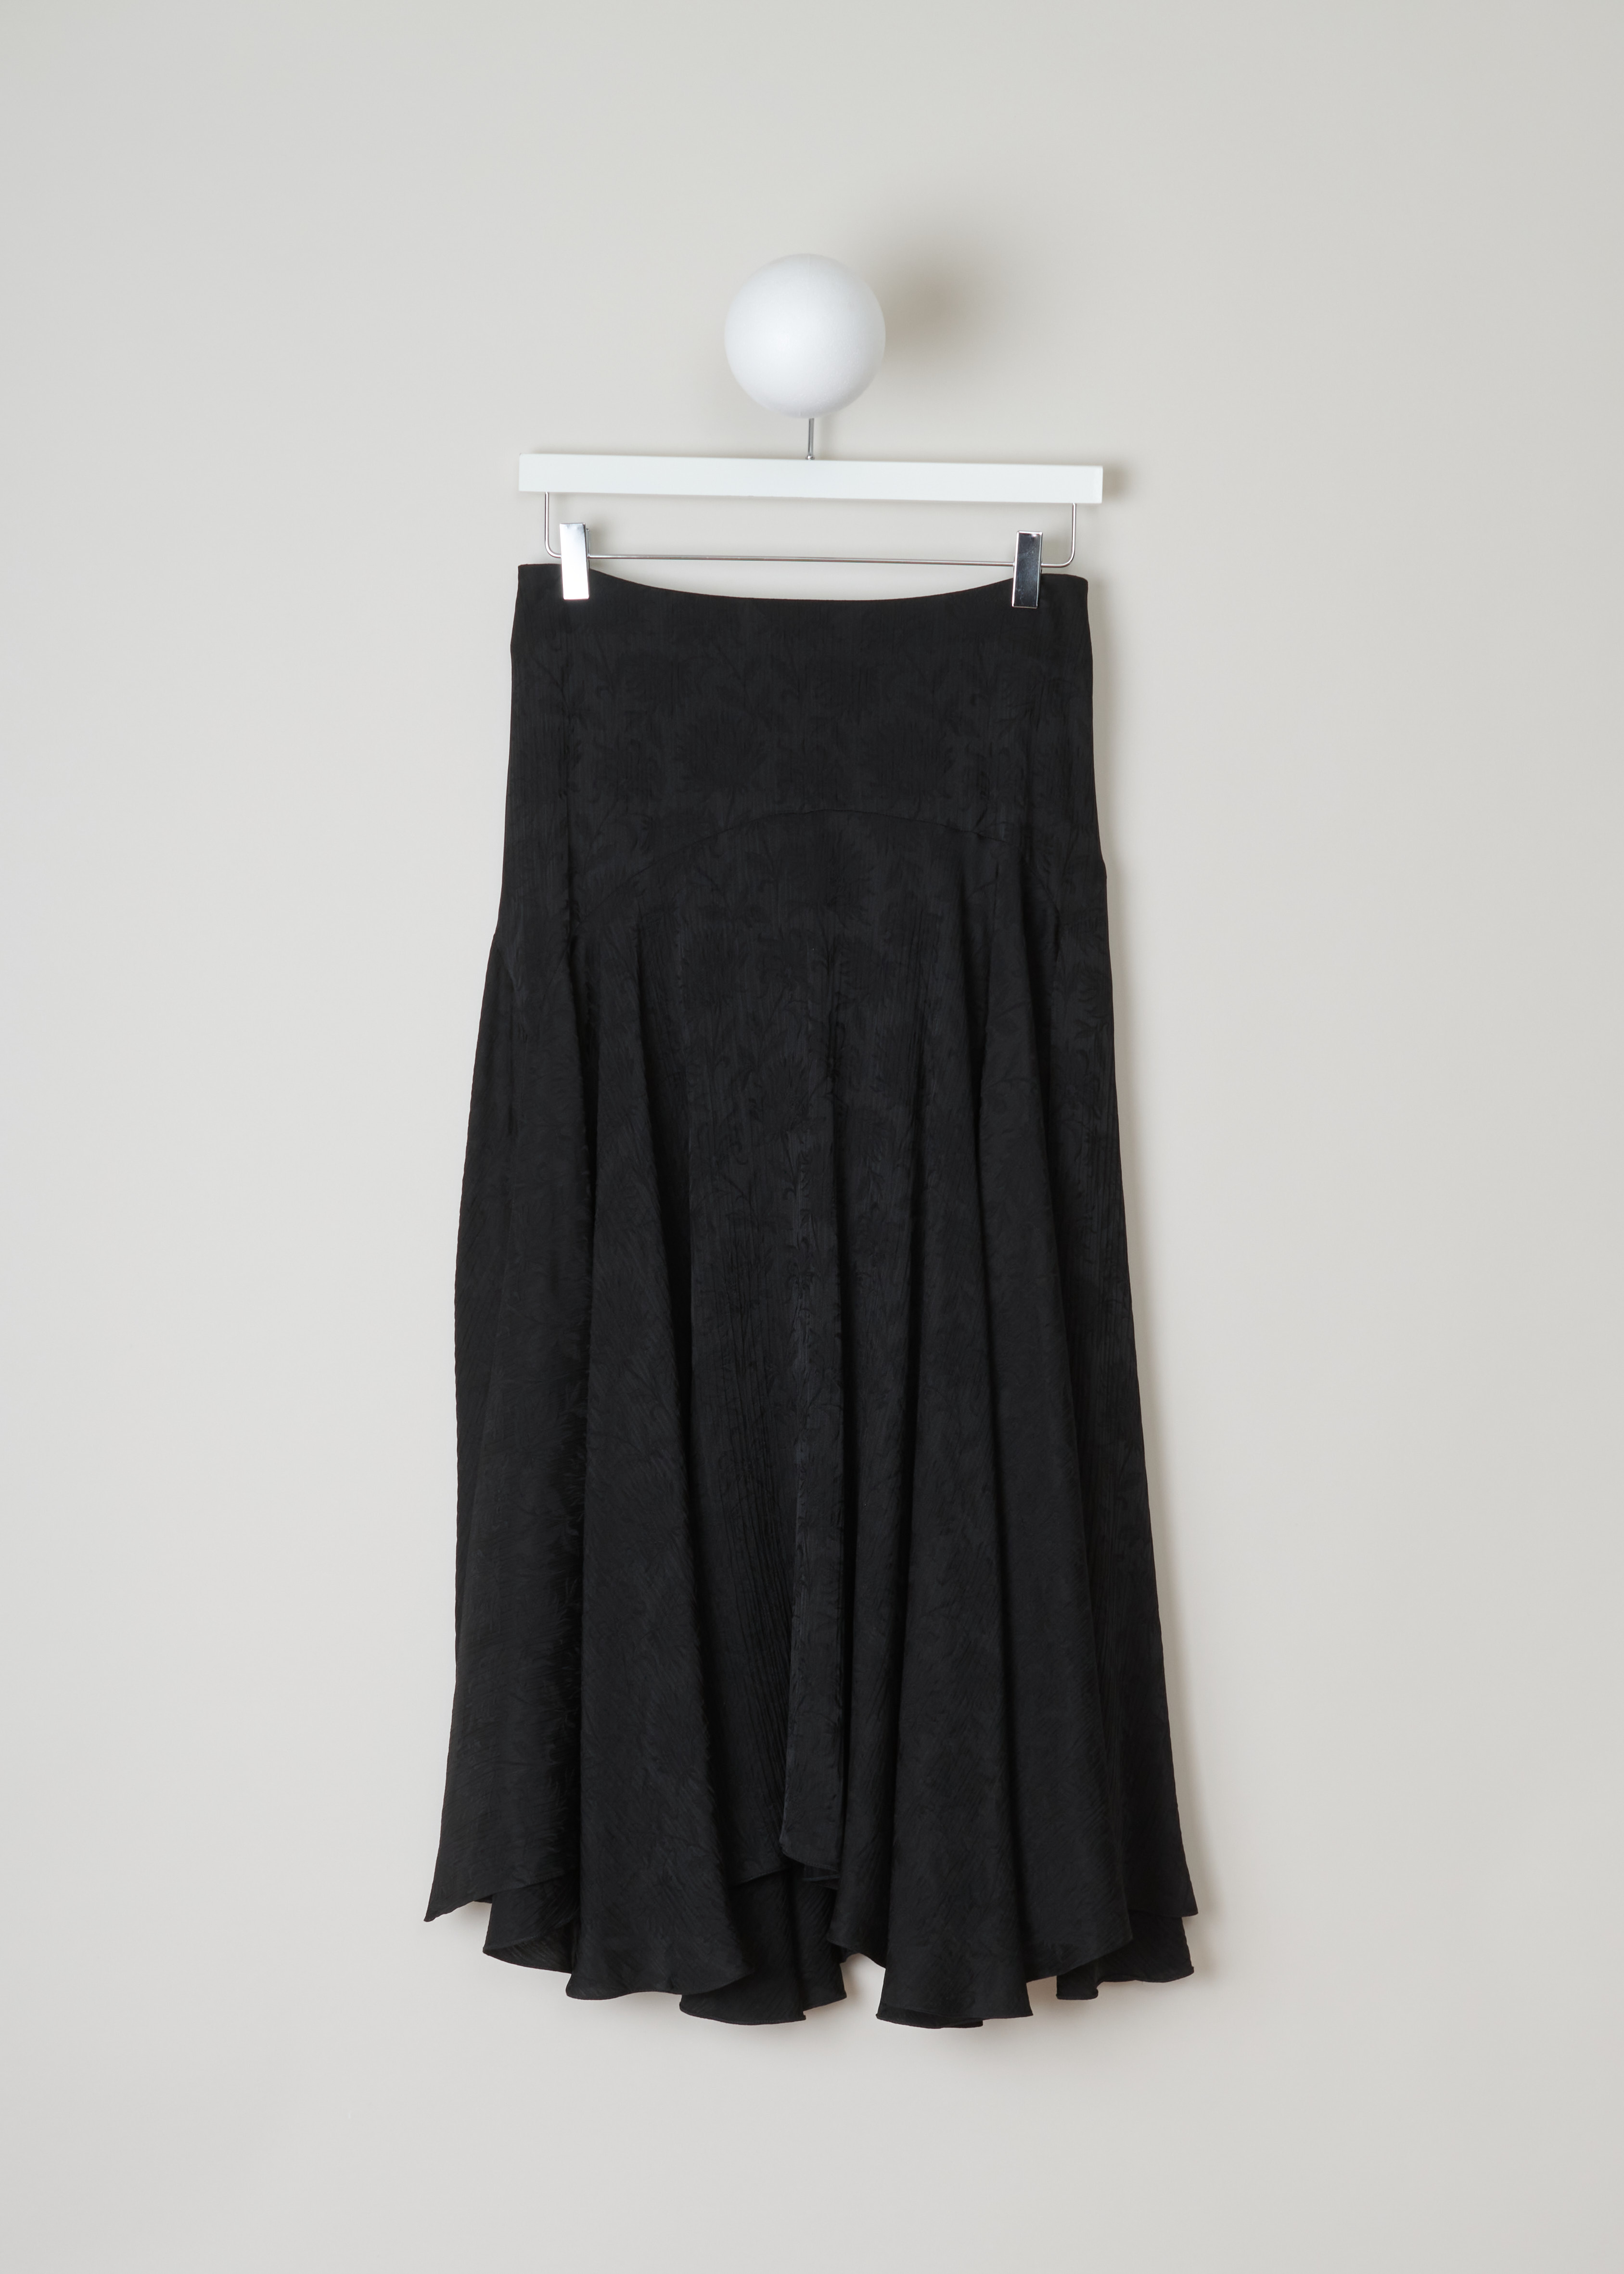 ChloÃ© Silk flower print skirt CHC19AJU14329001_001_Black front. Silk and viscose skirt from creased jacquard fabric with a flower pattern. The skirt features a fitted upper and a flared lower section to create an elegant, flowing silhouette. 